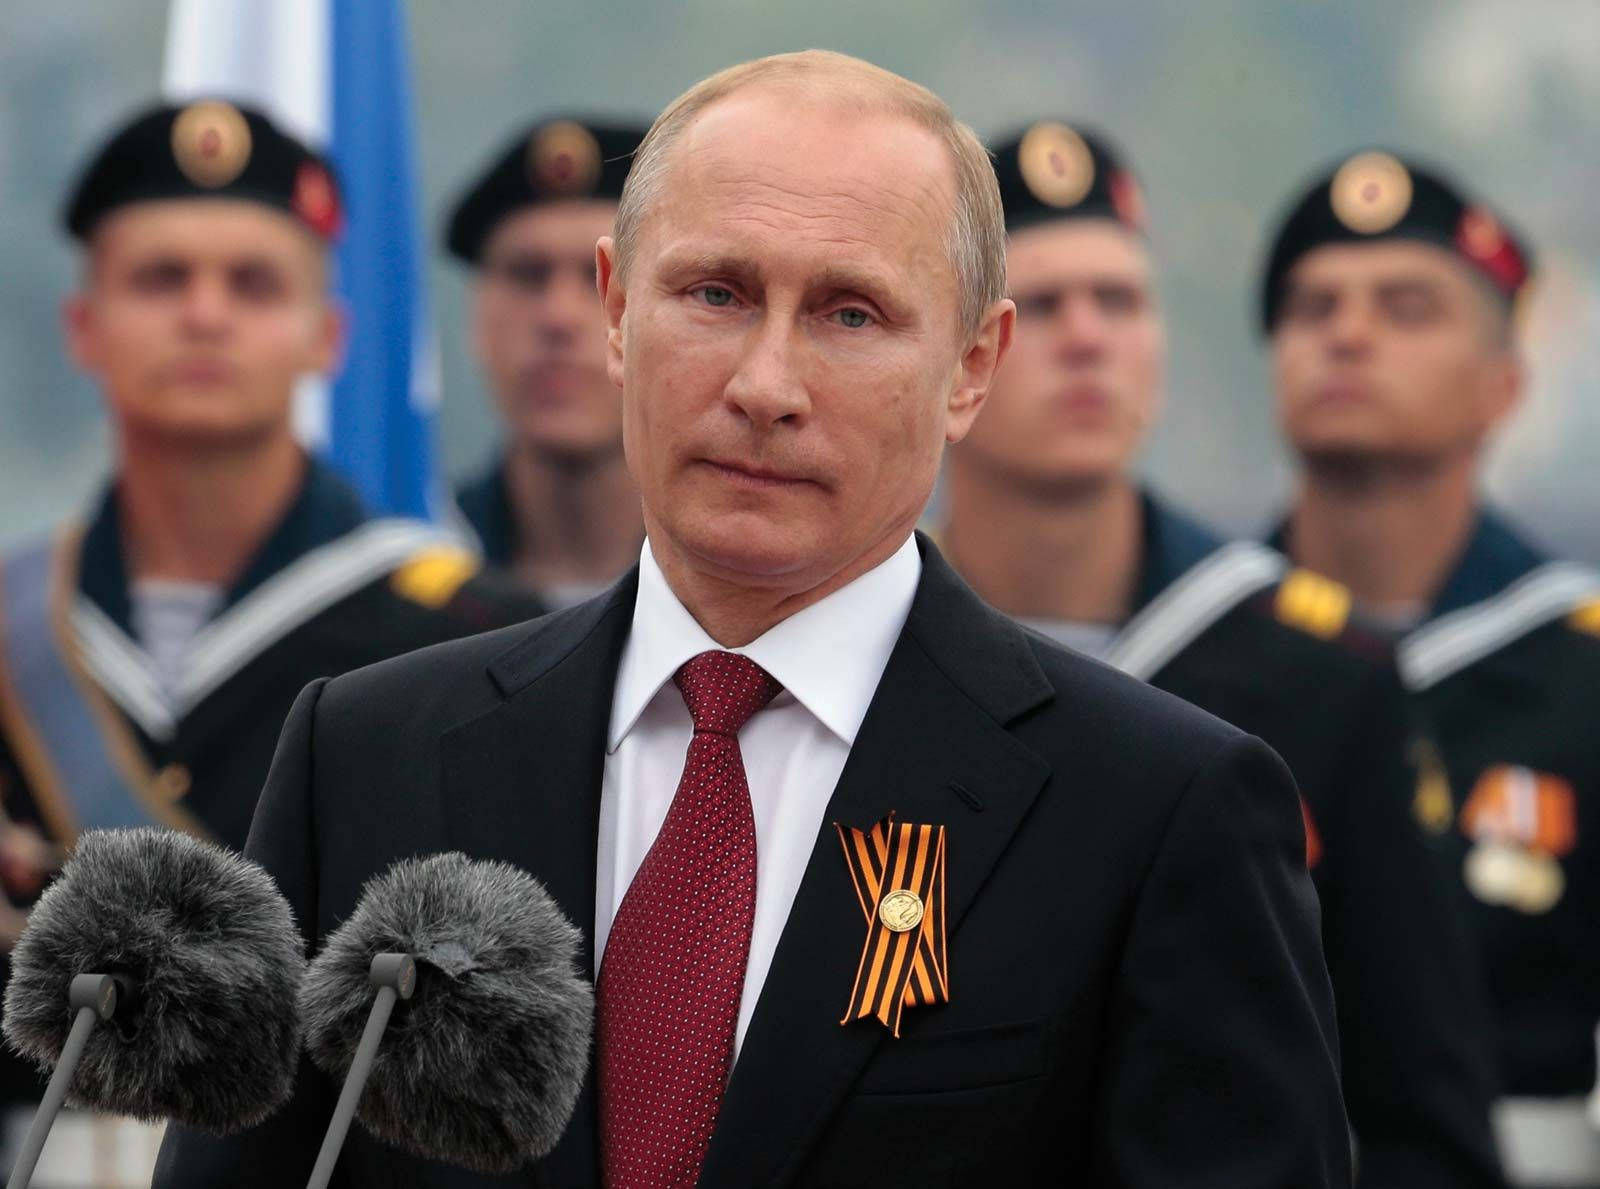 President Vladimir Putin Engaged In A Serious Gaze With The Camera. Wallpaper